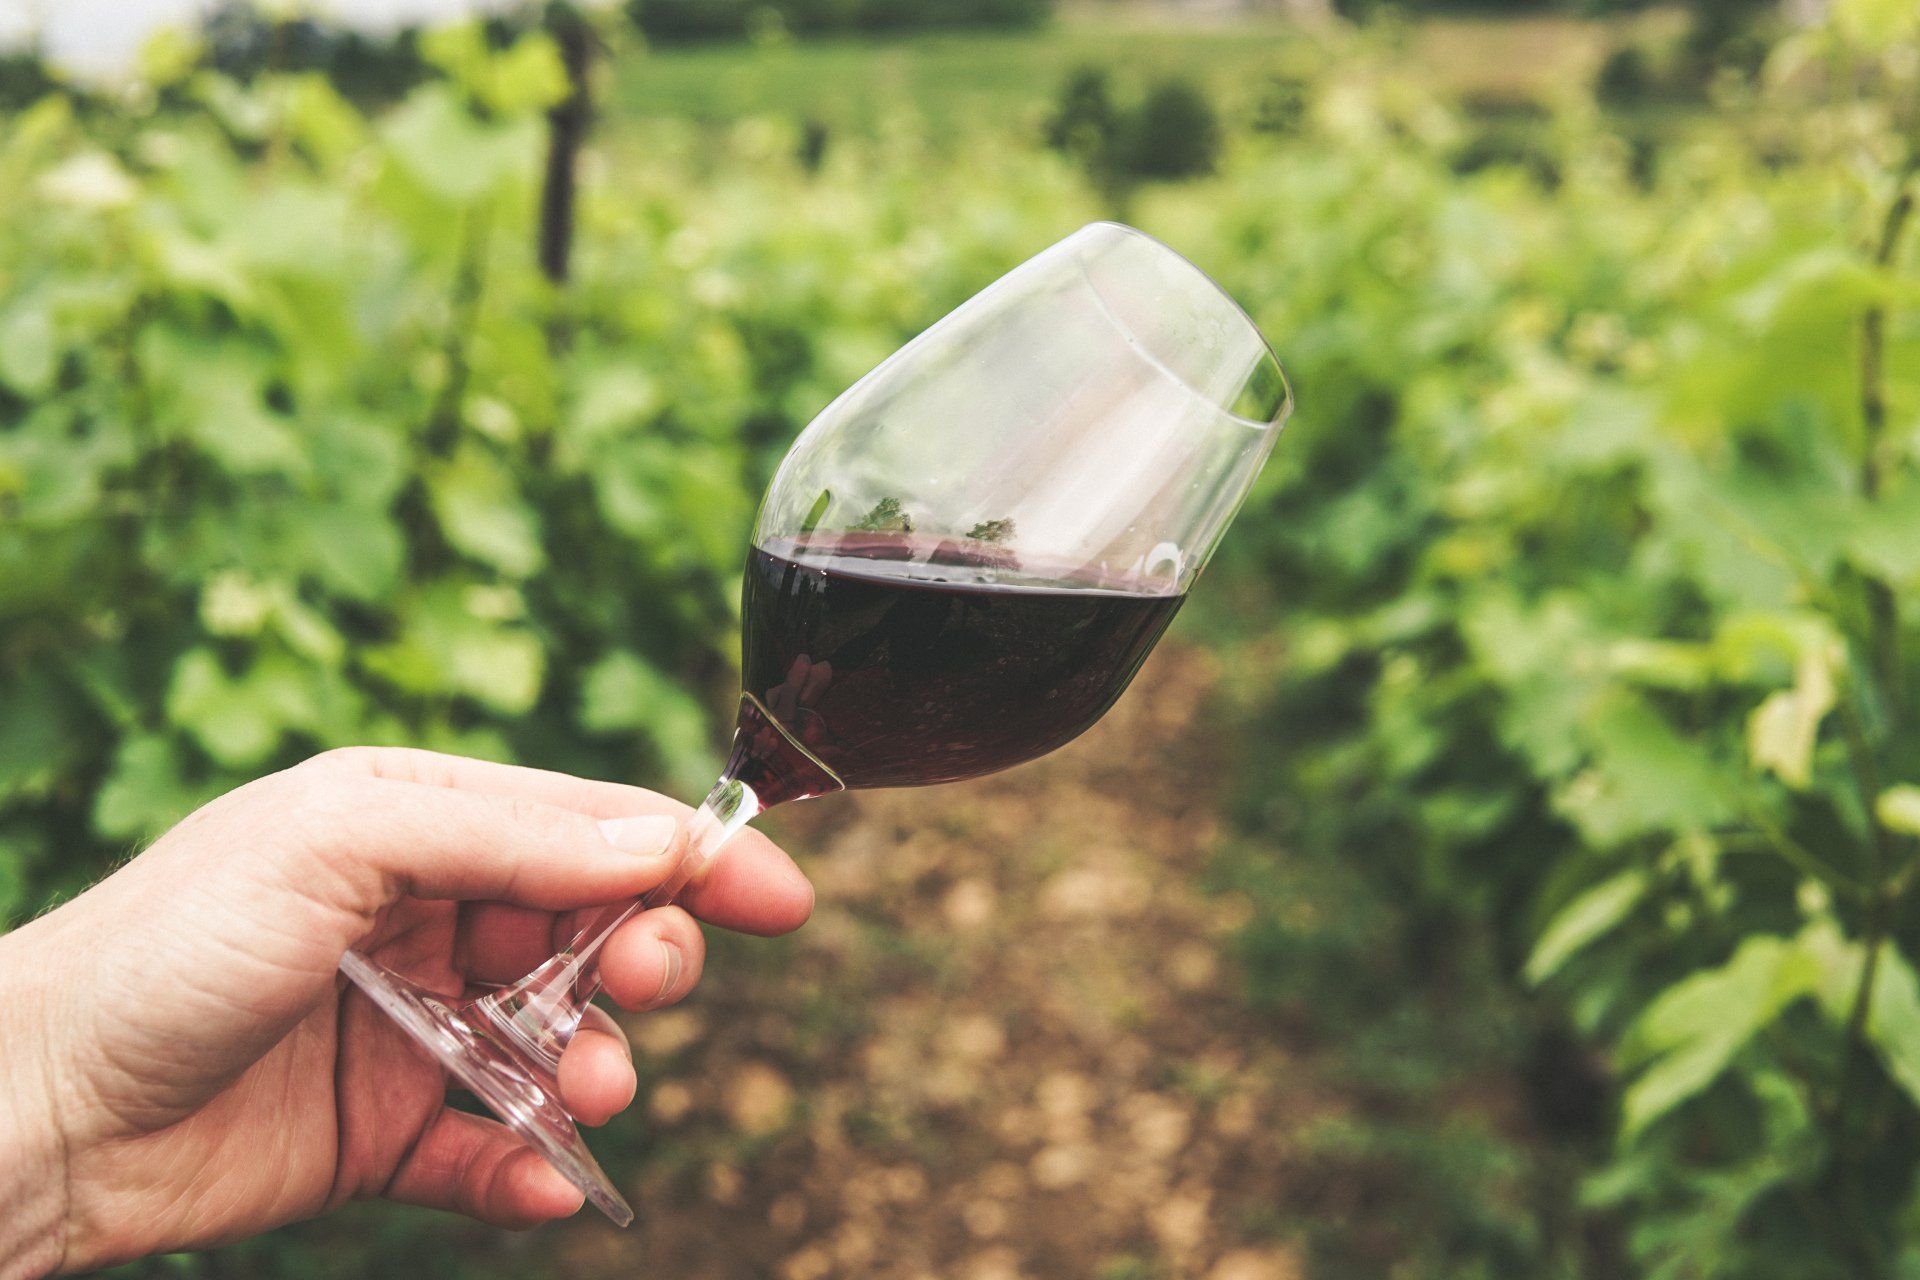 a person is holding a glass of red wine in a vineyard .